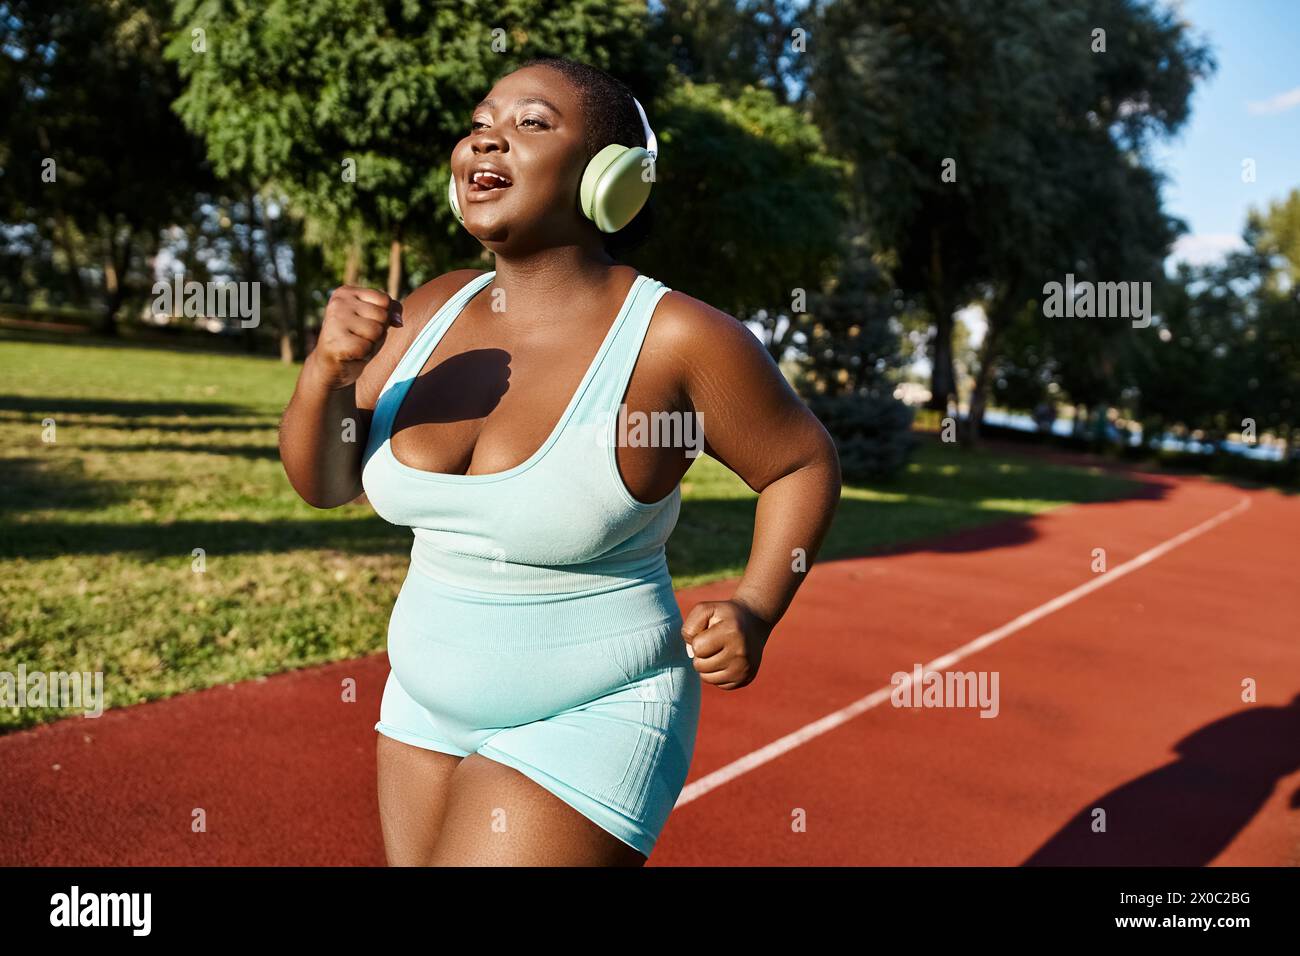 An African American woman in sportswear tunes into music with headphones while running on a track, embodying body positivity. Stock Photo